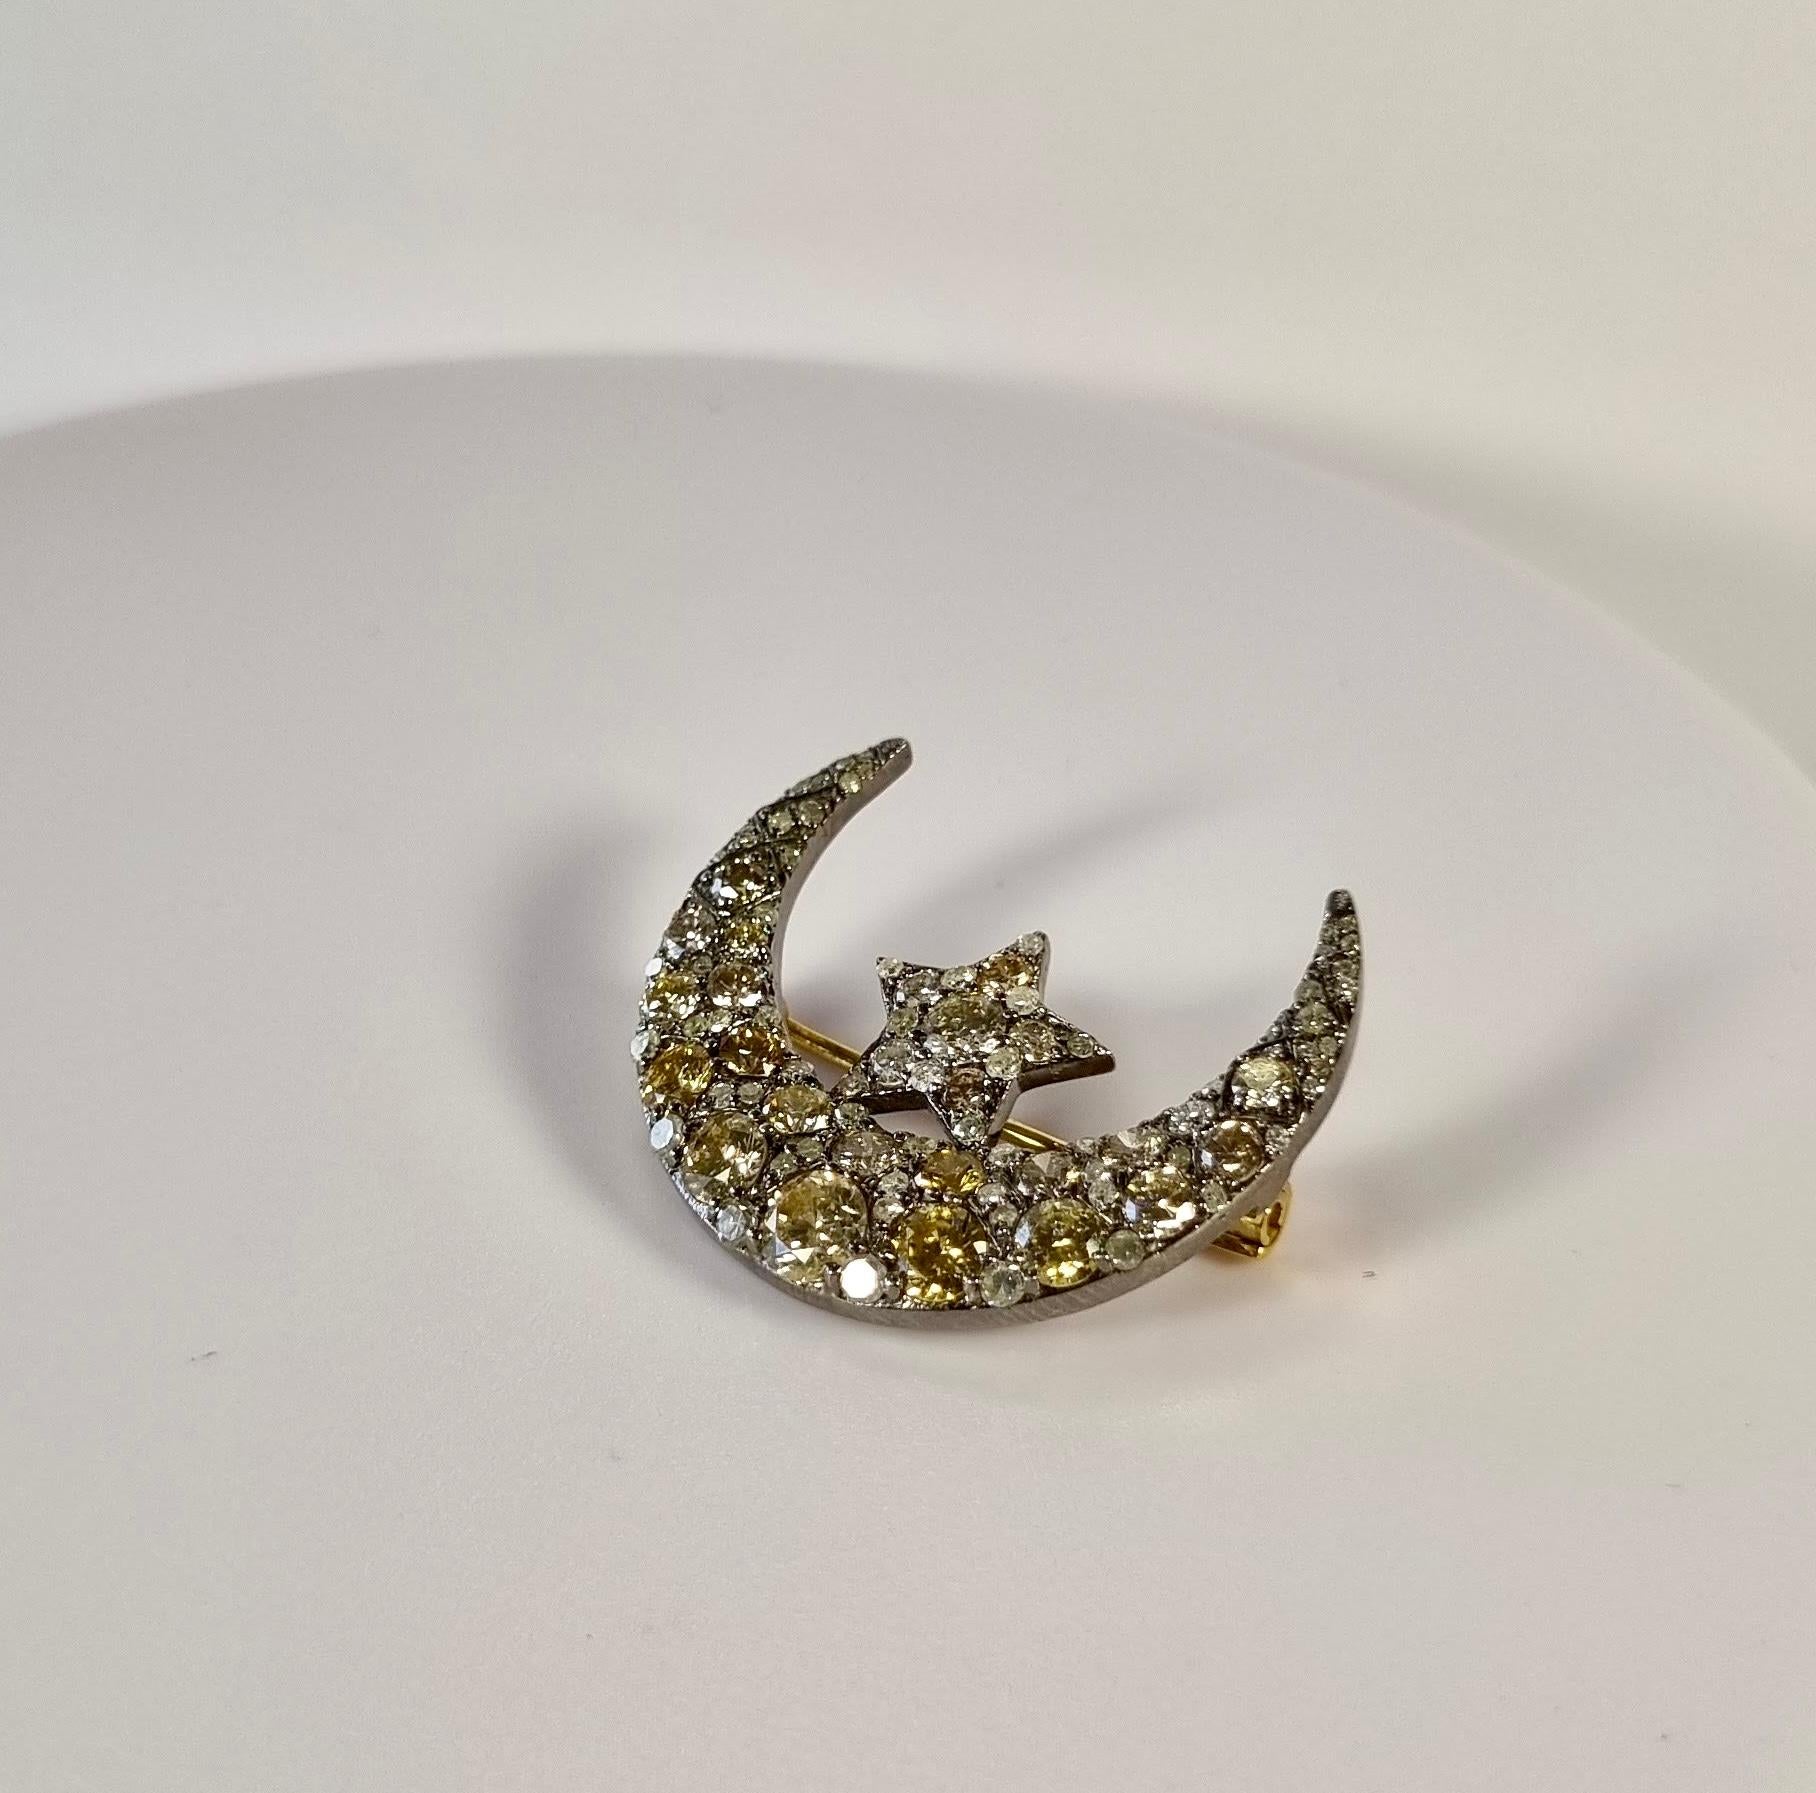 Moon & Star  Gold and silver Diamond Brooche
14k gold  1.29gr
Silver 3gr
Diamonds 94 diamonds 4.19ct. 

READY TO SHIP
*Shipment of this piece is not affected by COVID-19. Orders welcome!

PRADERA is a second generation of a family run business